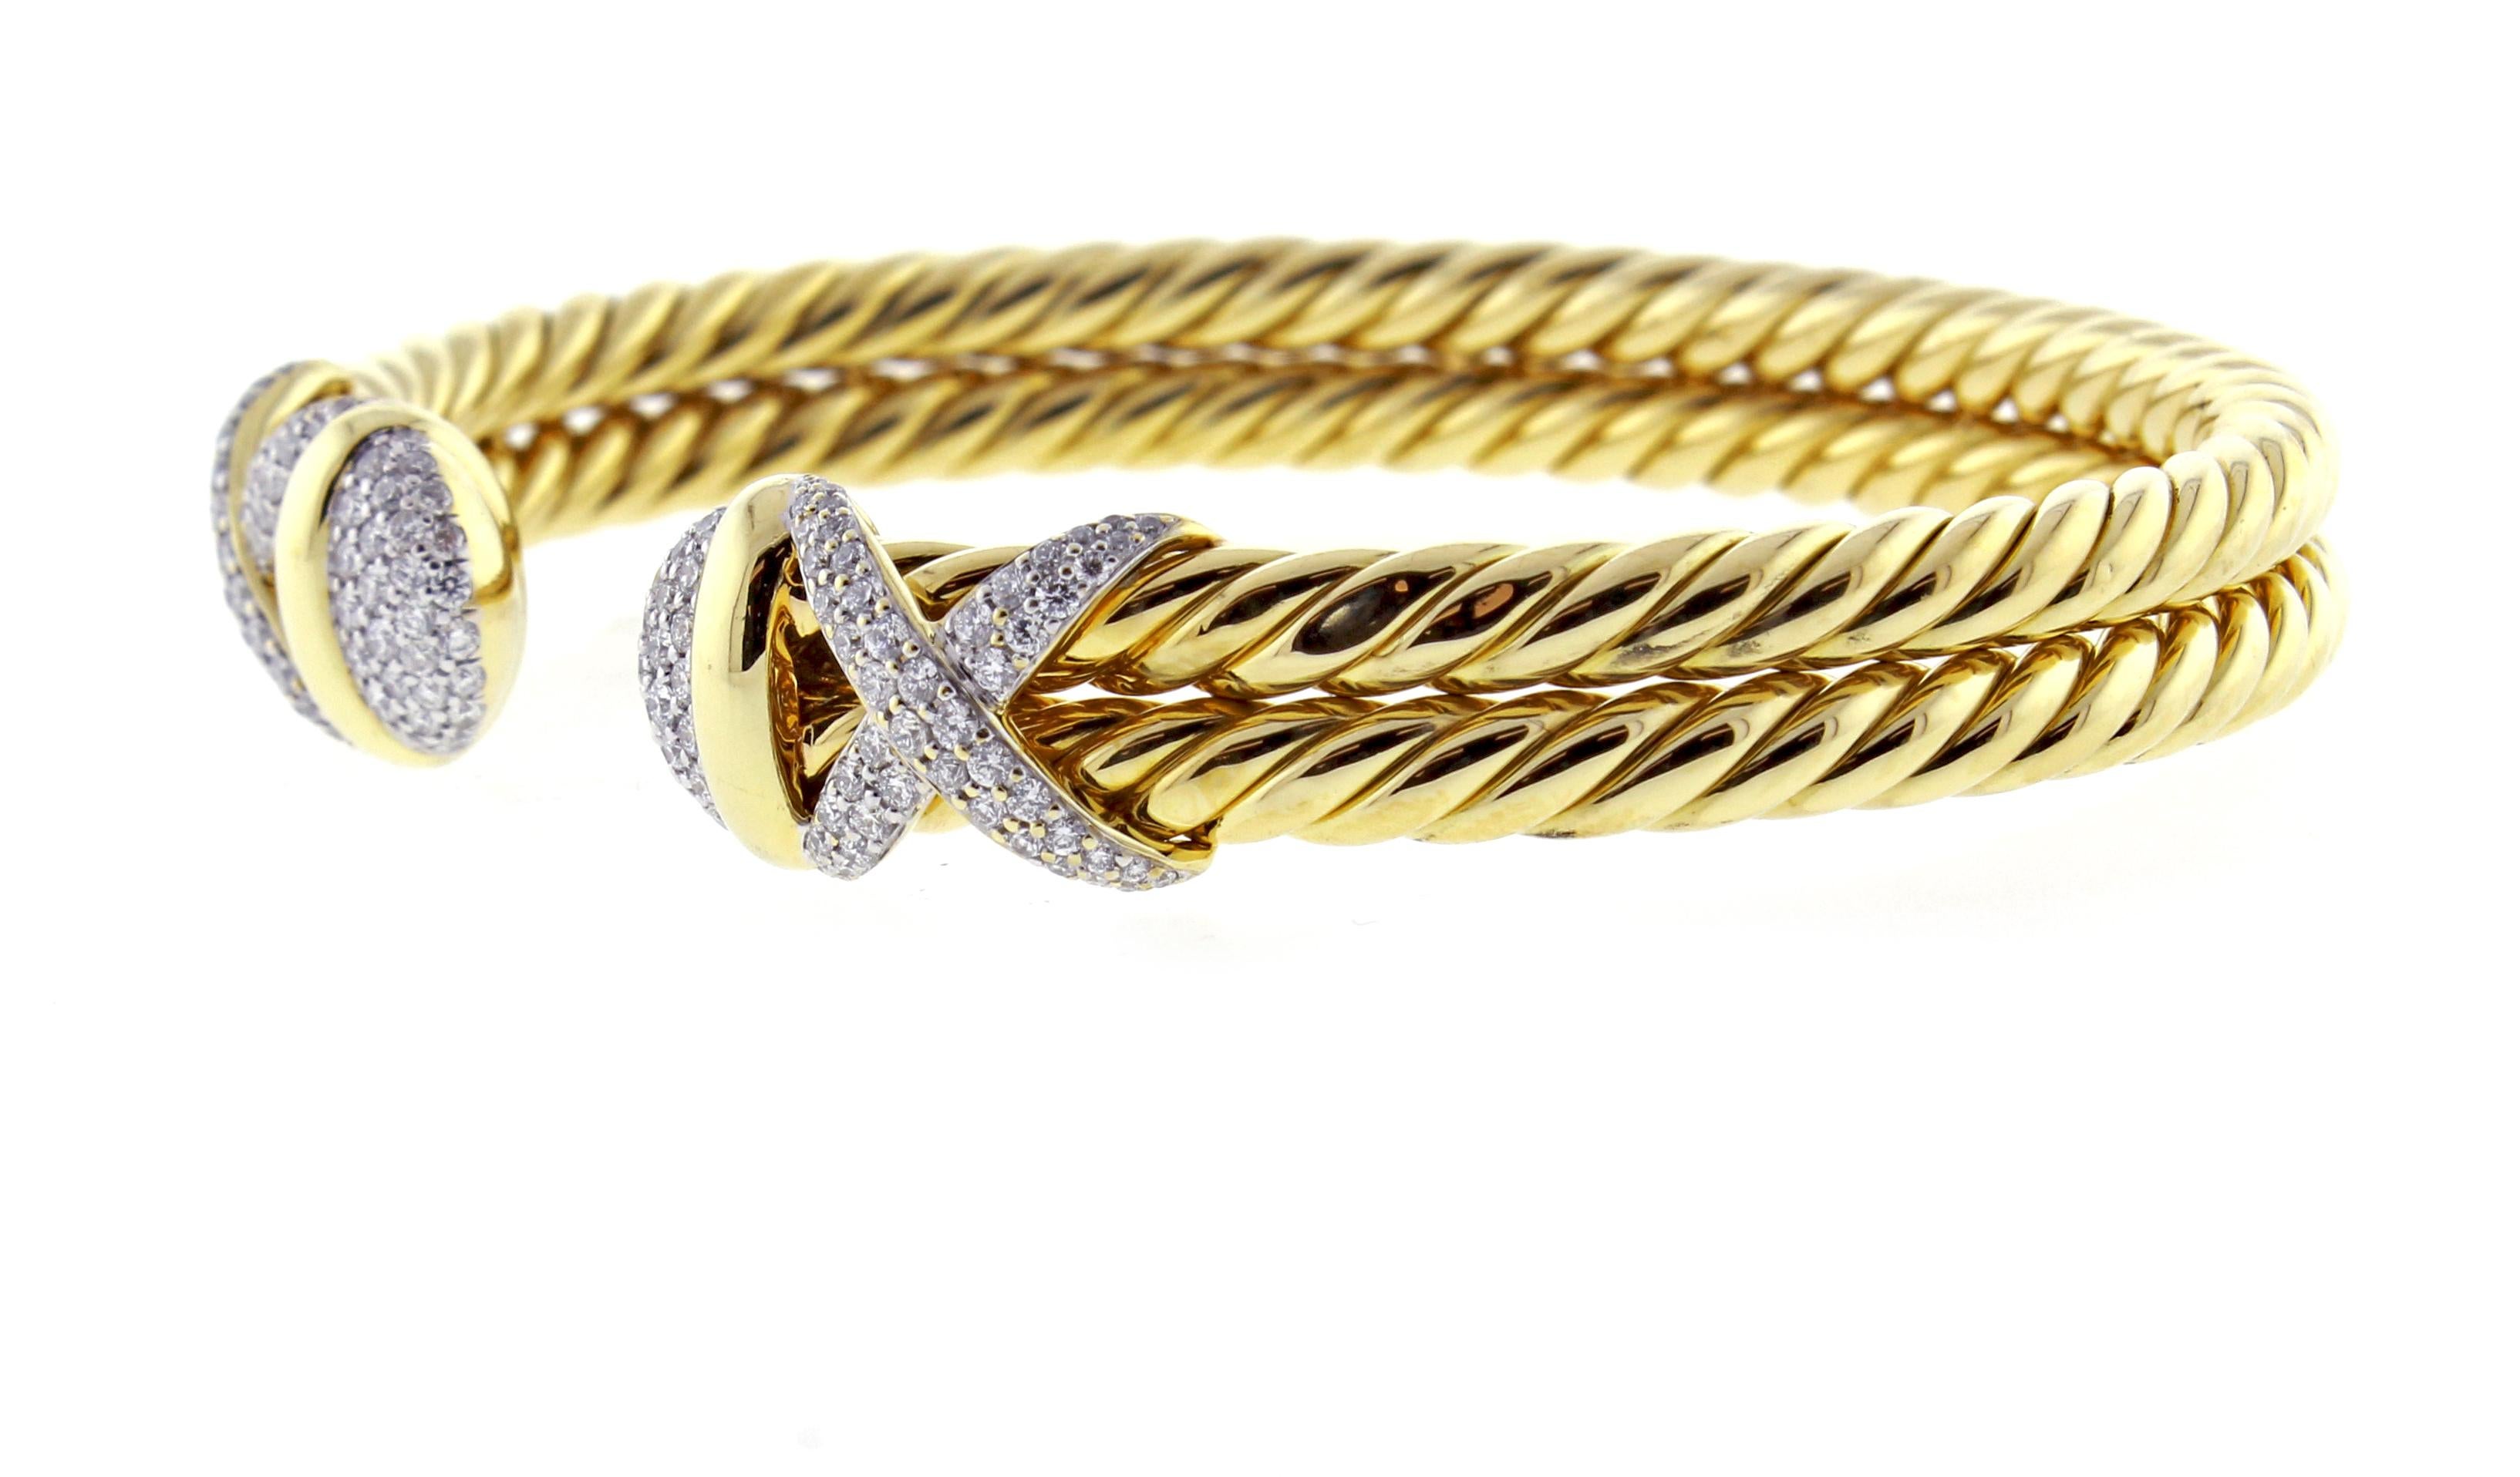 From Davis Yurman's Cable collection, his  double cable wrap bracelet.  The double 18 karat cables are 8mm wide with dazzling pave diamond caps and diamond 